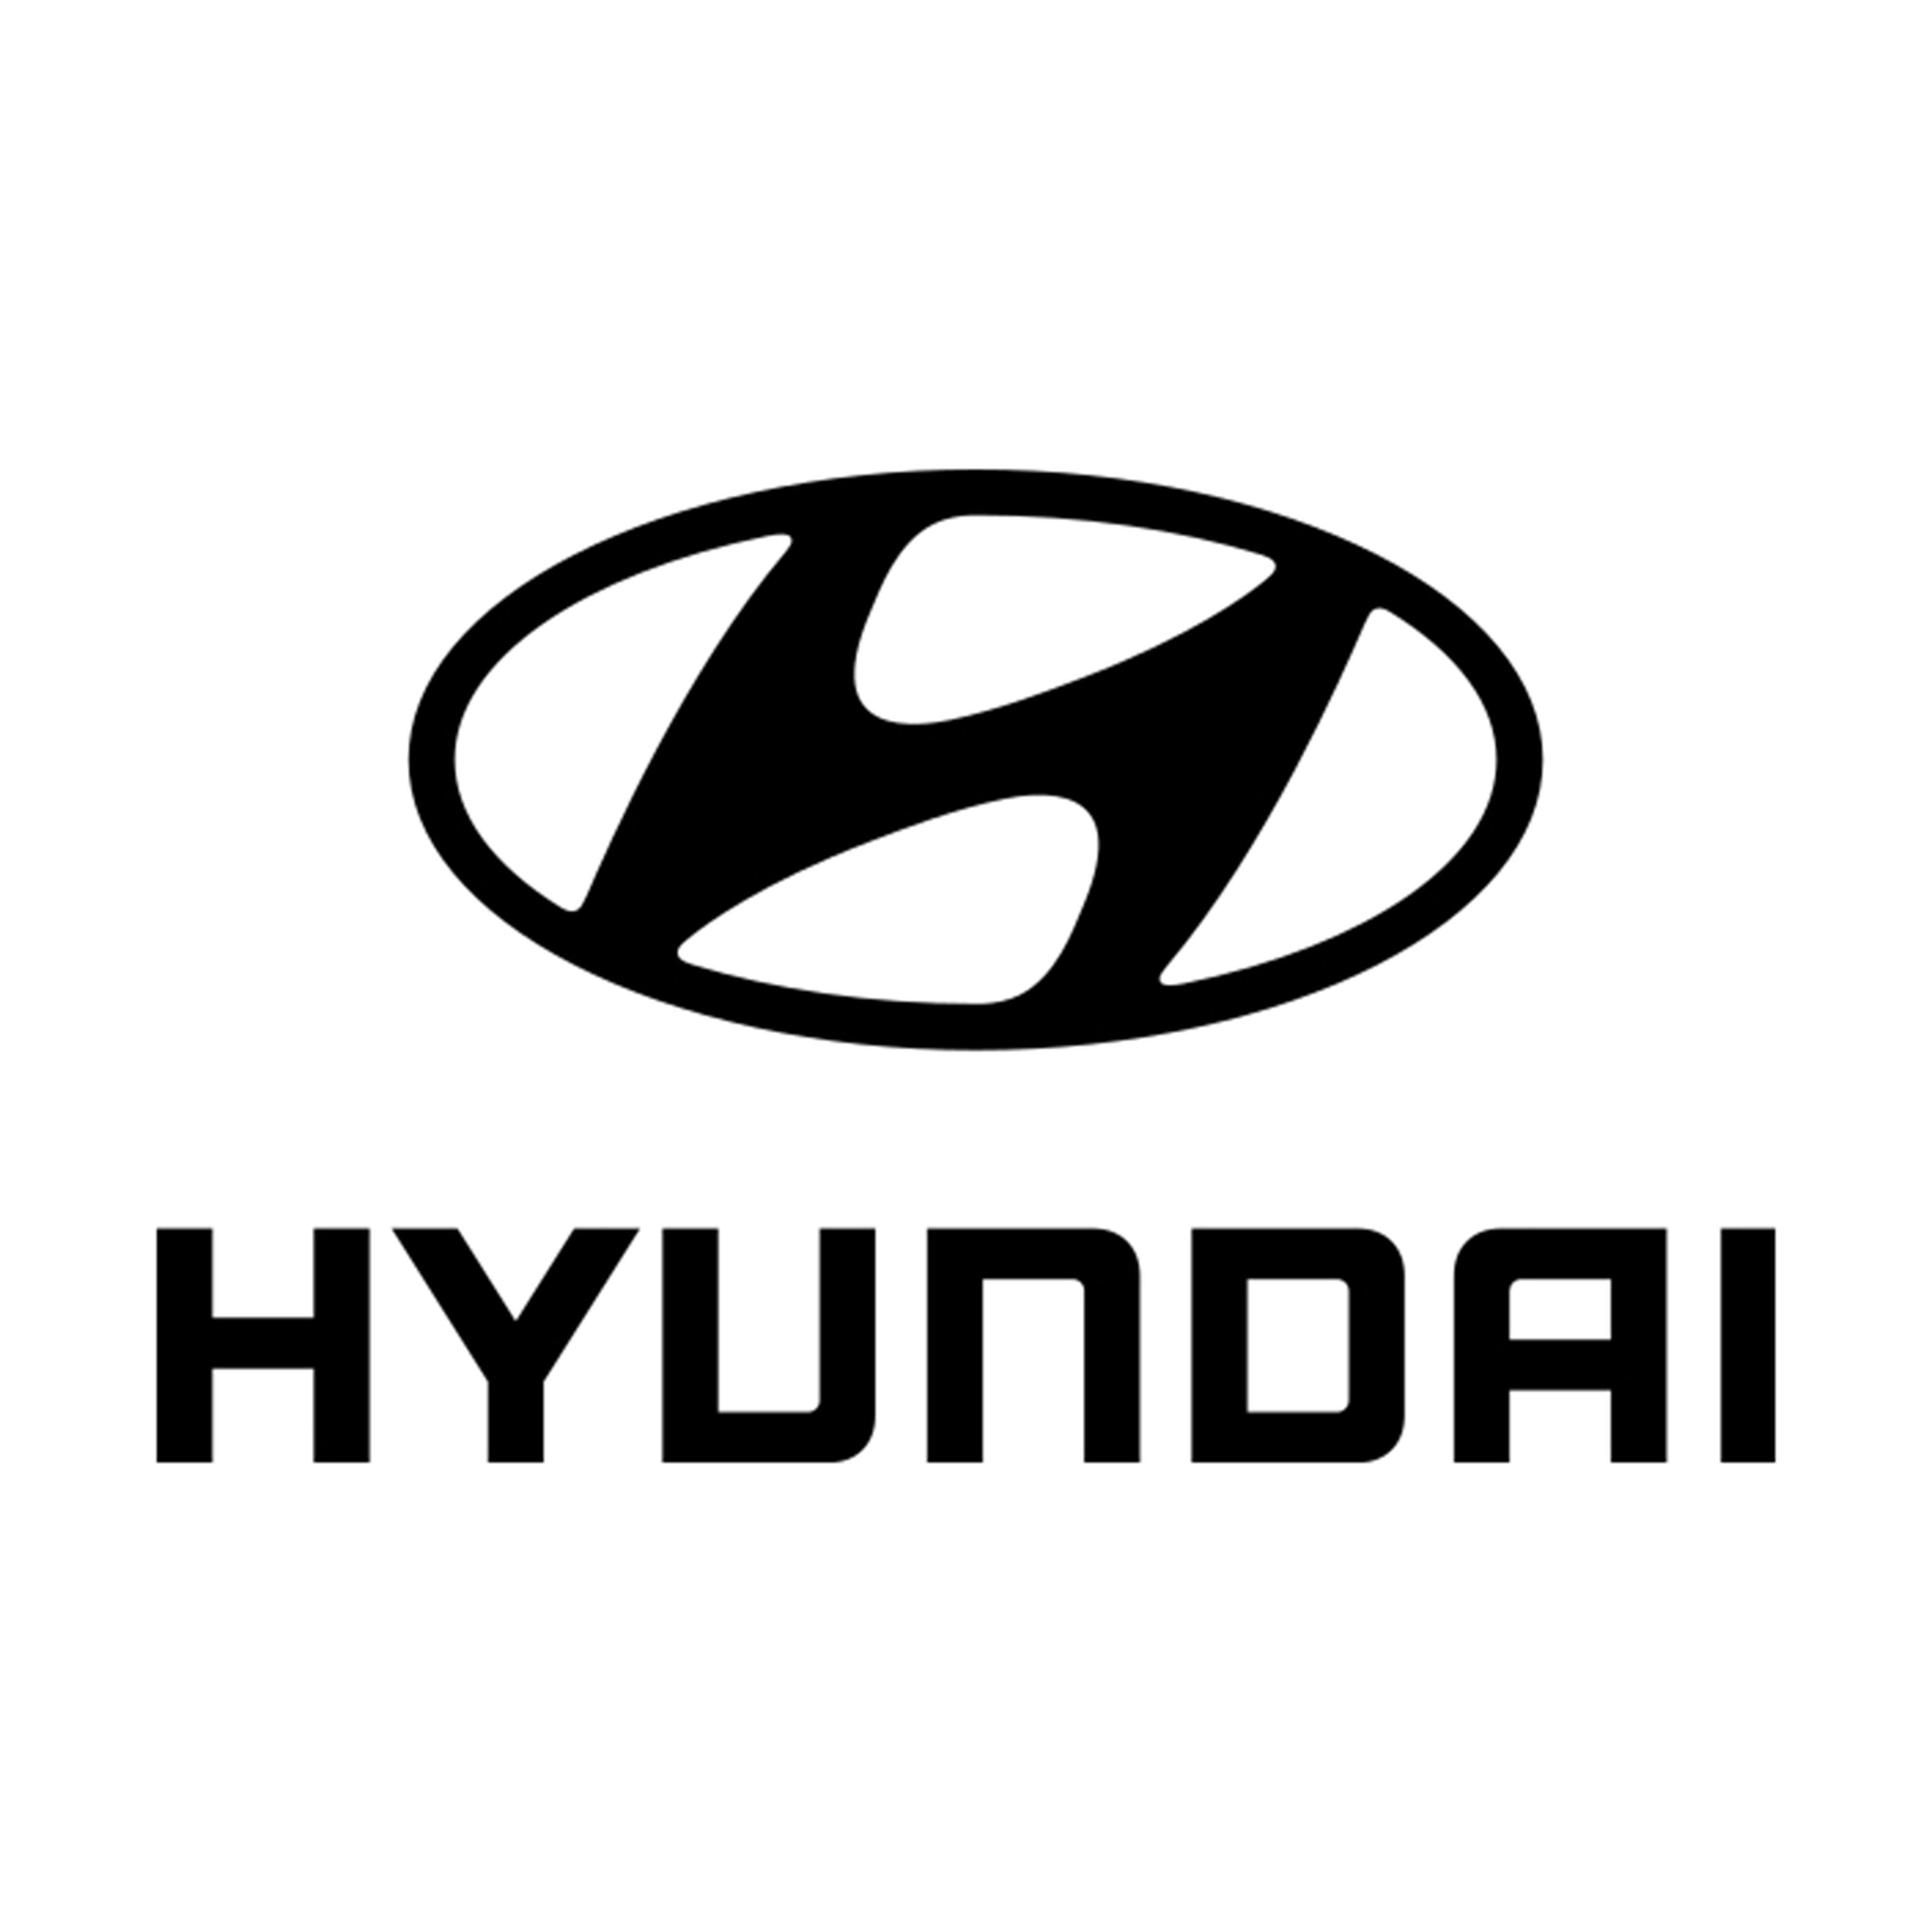 The image displays the Hyundai logo, characterized by a stylized, slanted 'h' enclosed in an oval shape, above the bold, all-caps text "Hyundai".